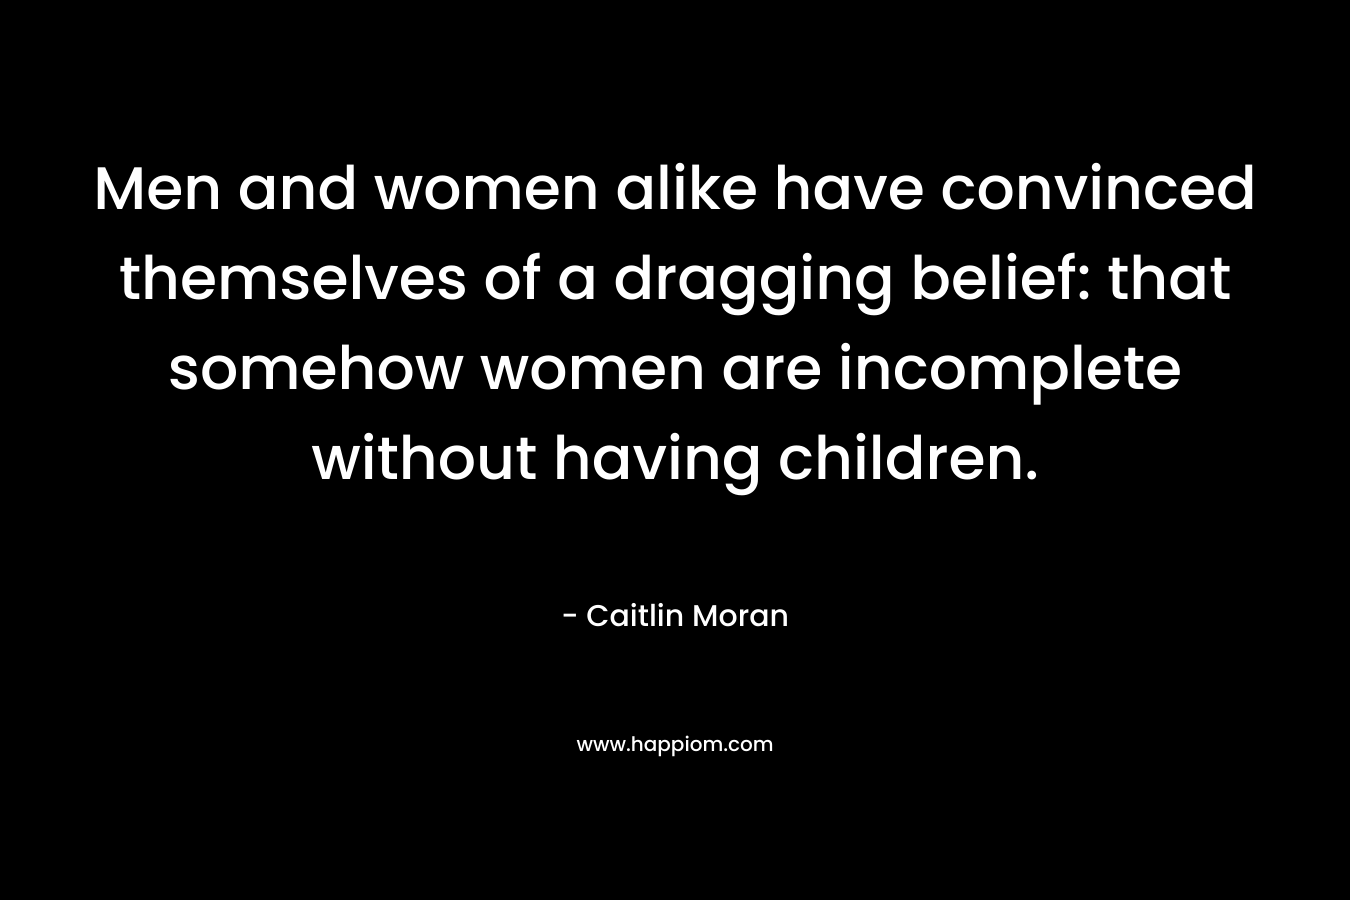 Men and women alike have convinced themselves of a dragging belief: that somehow women are incomplete without having children.